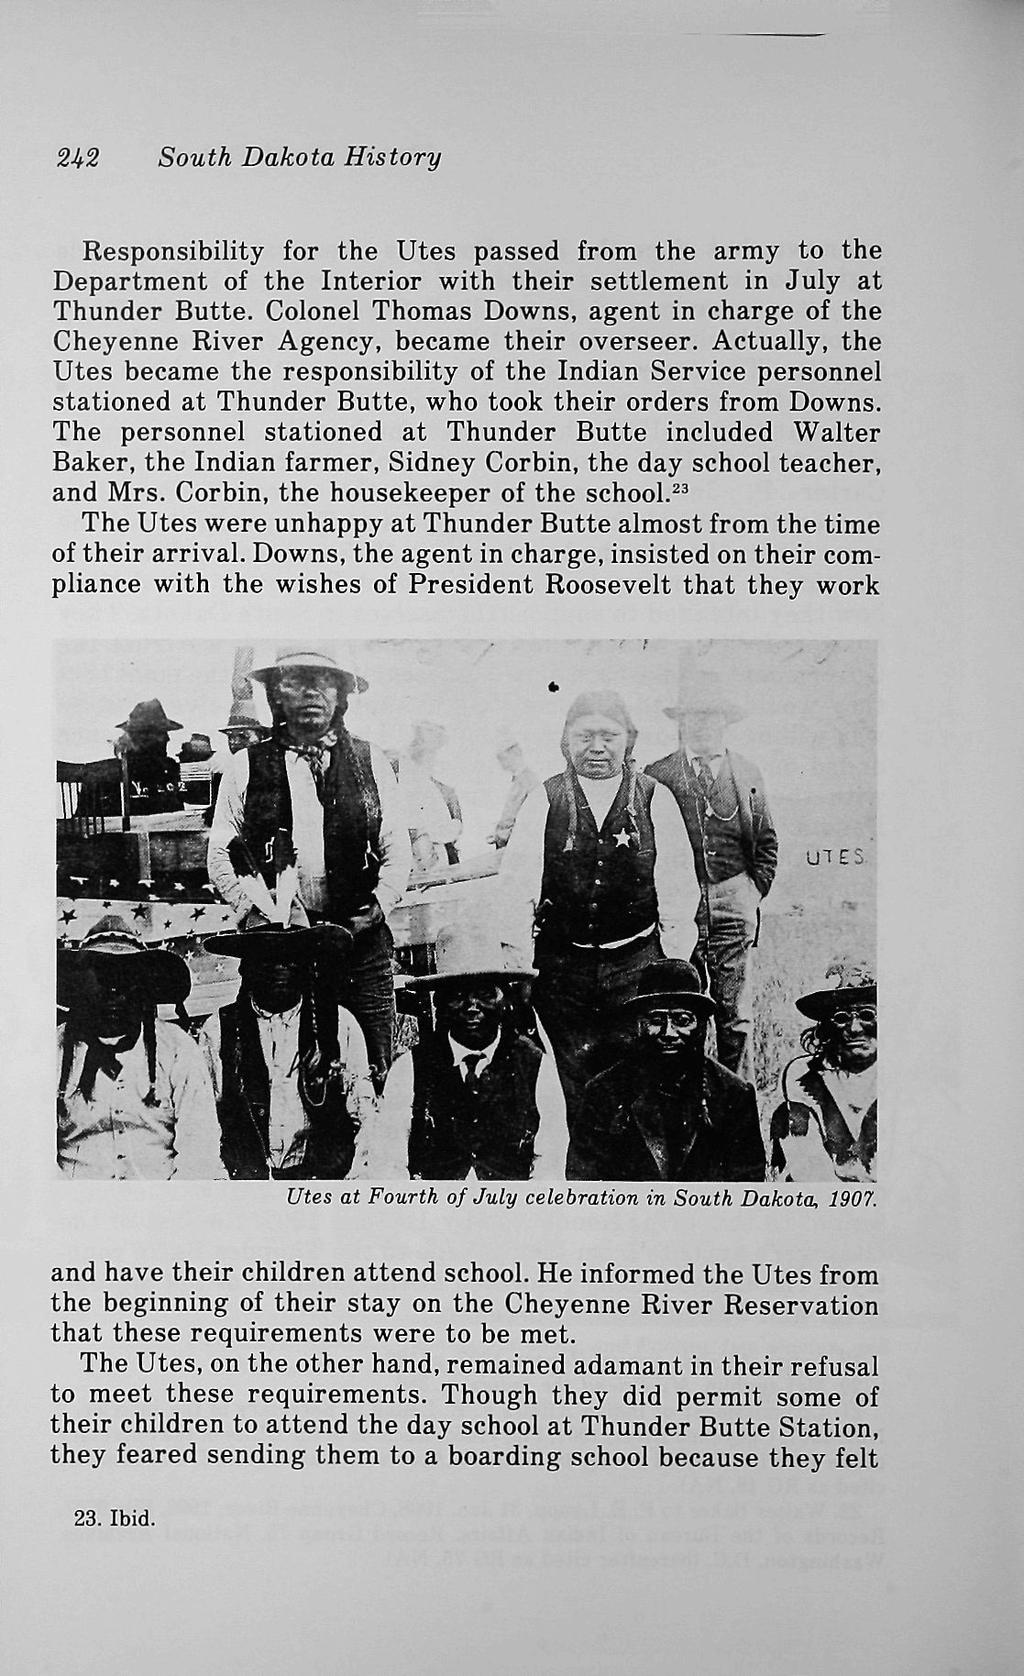 2+2 South Dakota History Responsibility for the Utes passed from the army to the Department of the Interior with their settlement in July at Thunder Butte.